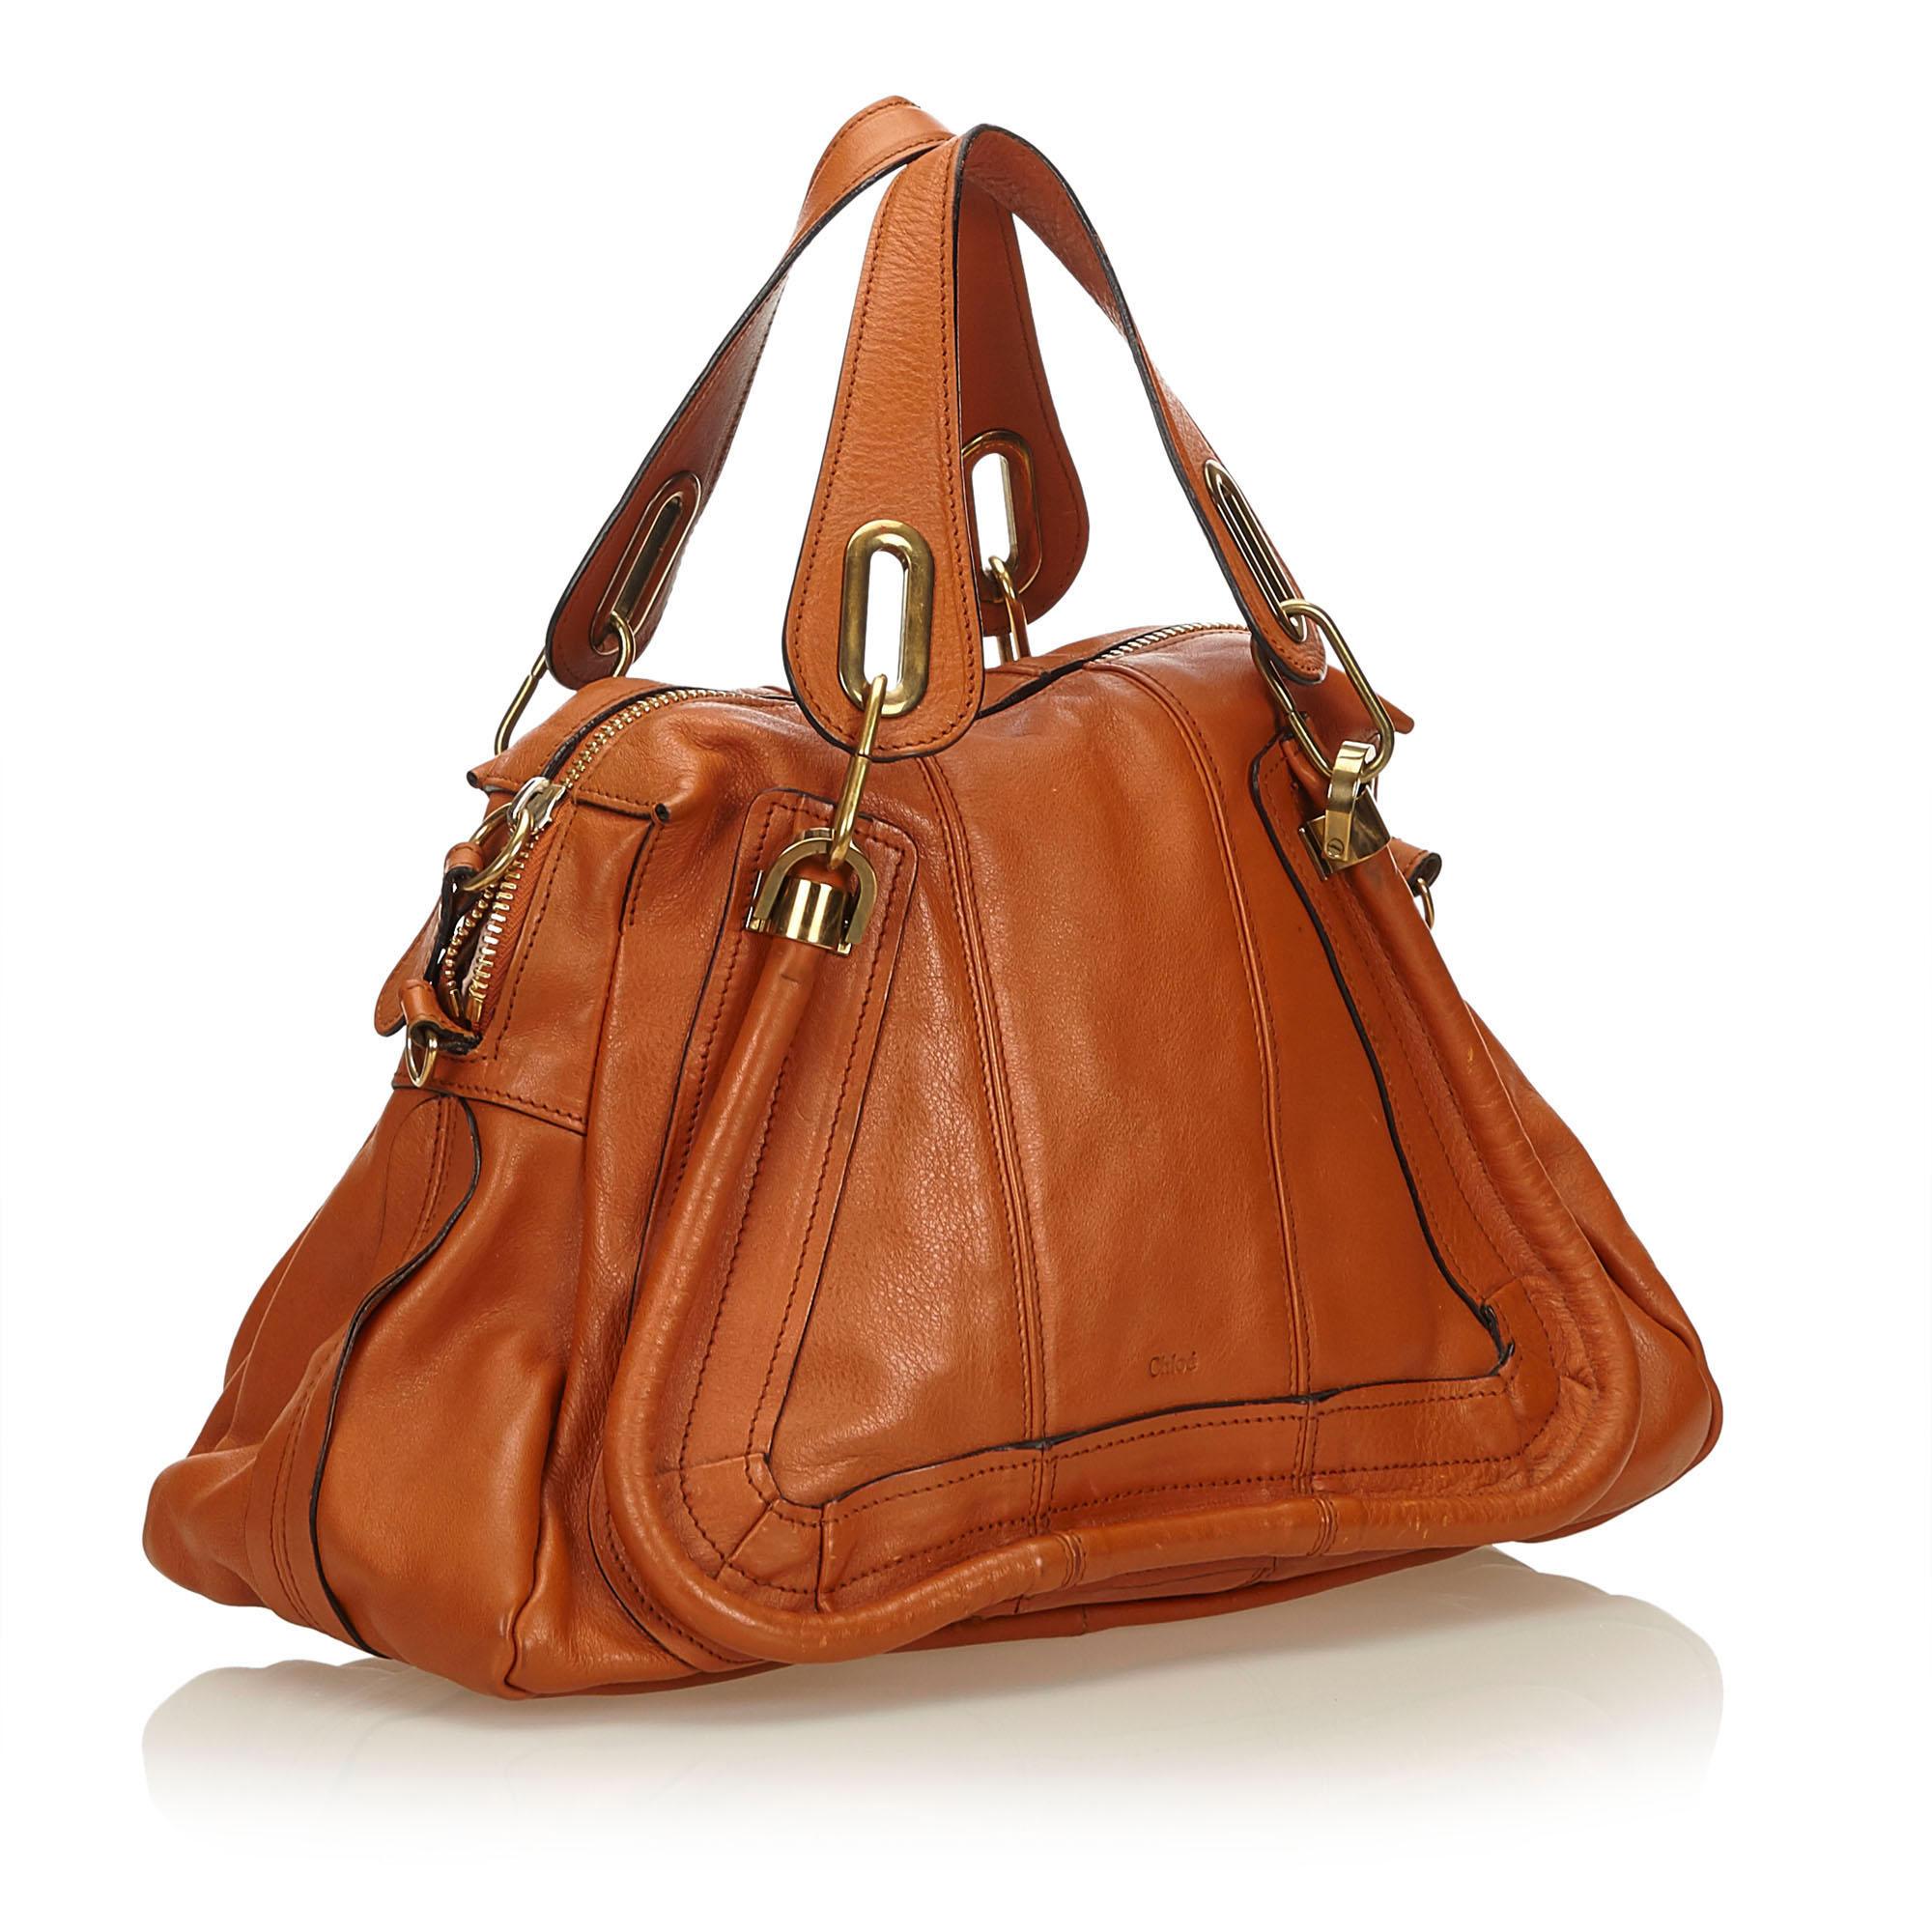 The Paraty features a leather body, gold-tone hardware, flat straps, a top zip closure, and interior zip and slip pockets. It carries as B condition rating.

Inclusions: 
Authenticity Card

Dimensions:
Length: 23.00 cm
Width: 37.00 cm
Depth: 14.00